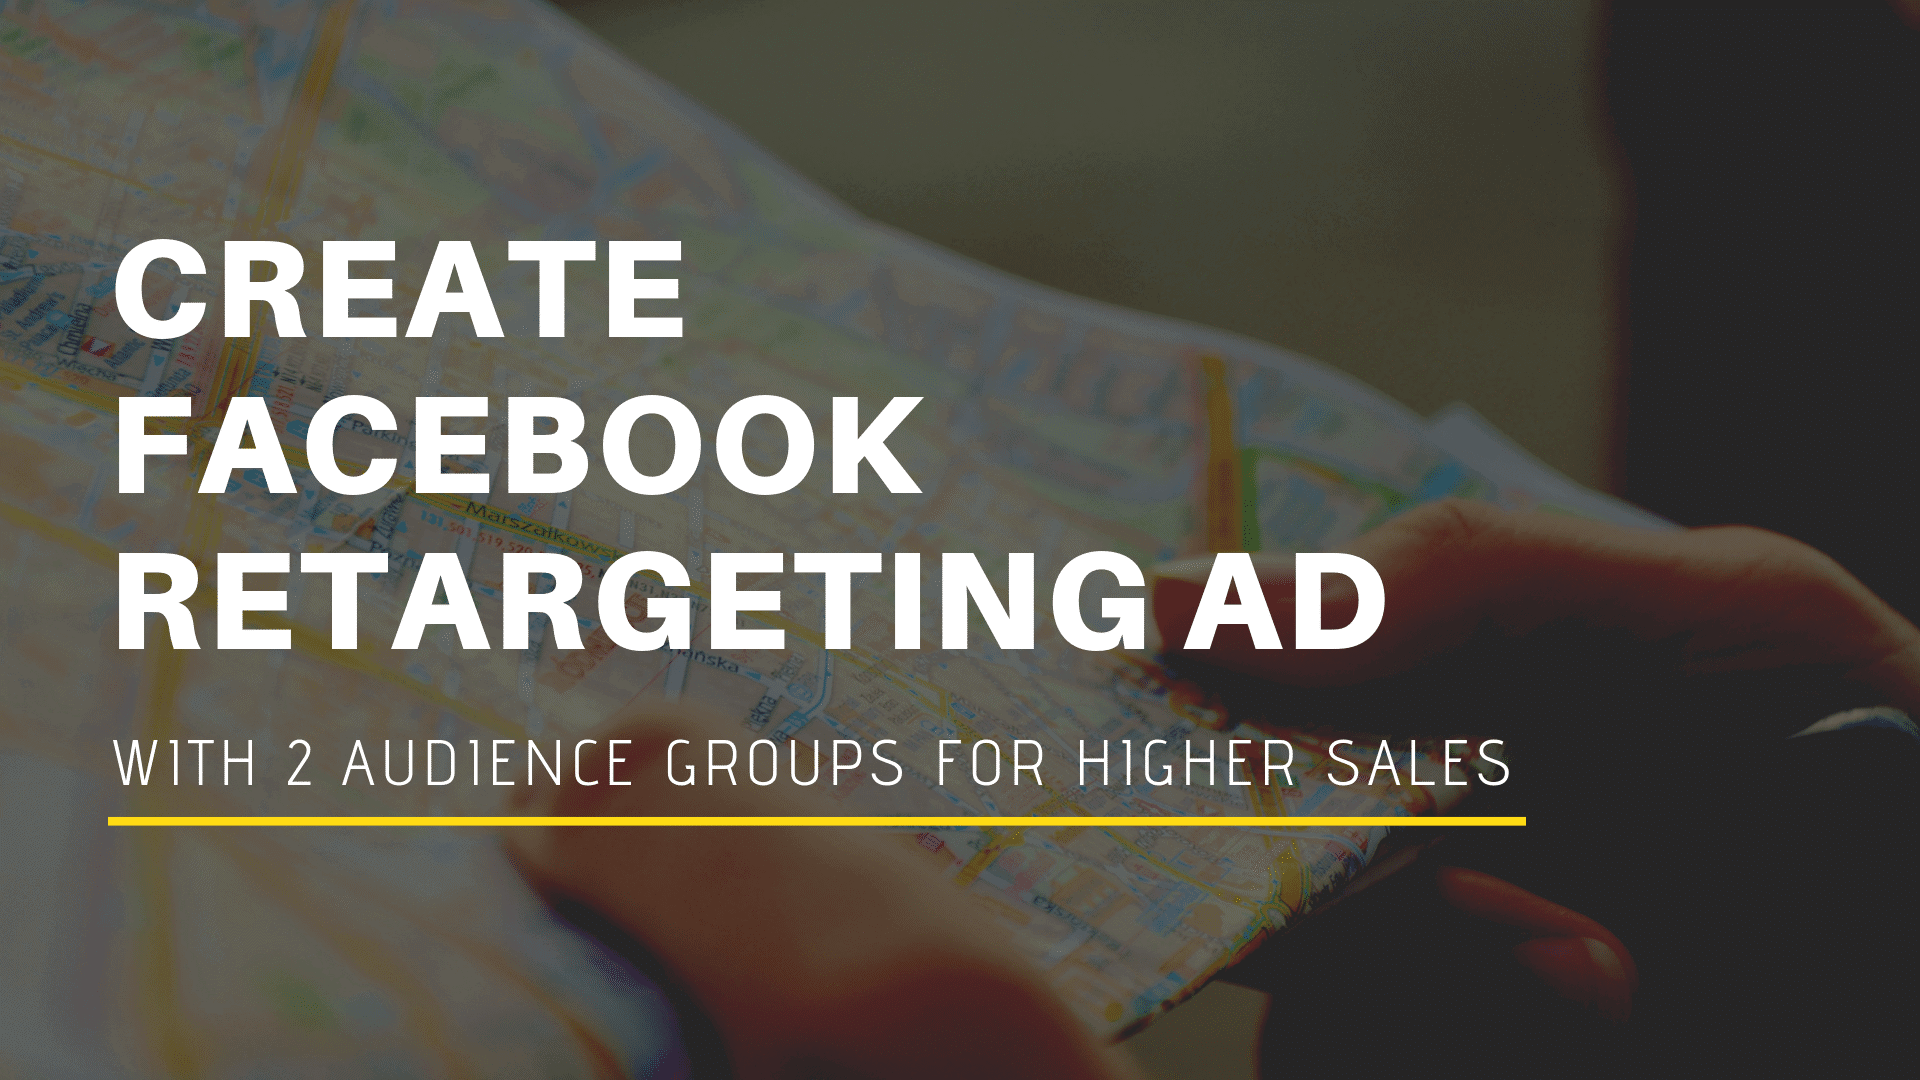 How to create Facebook Retargeting Ads successfully